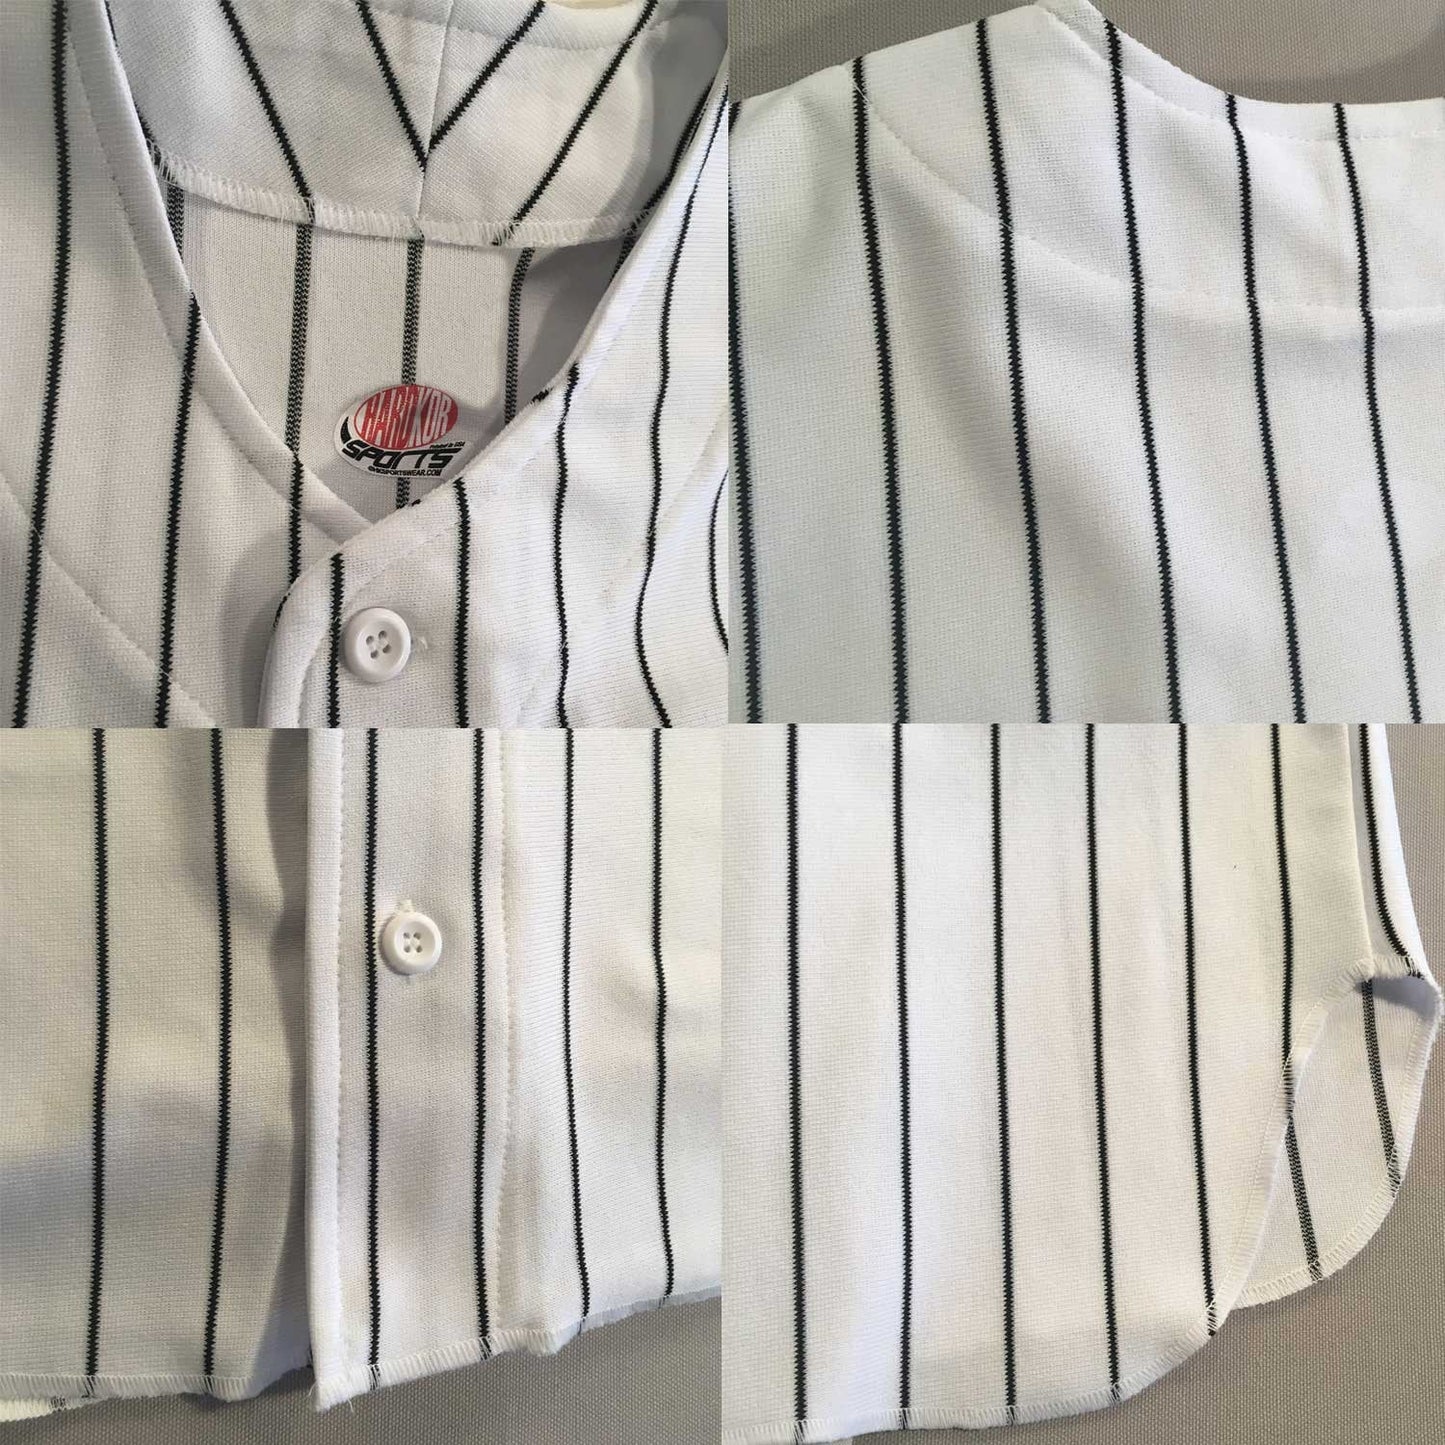 Customized Pinstriped Baseball Jersey| Full Button Down, Grey with Black Pinstripes Personalized Jersey with your Team, Player, Numbers